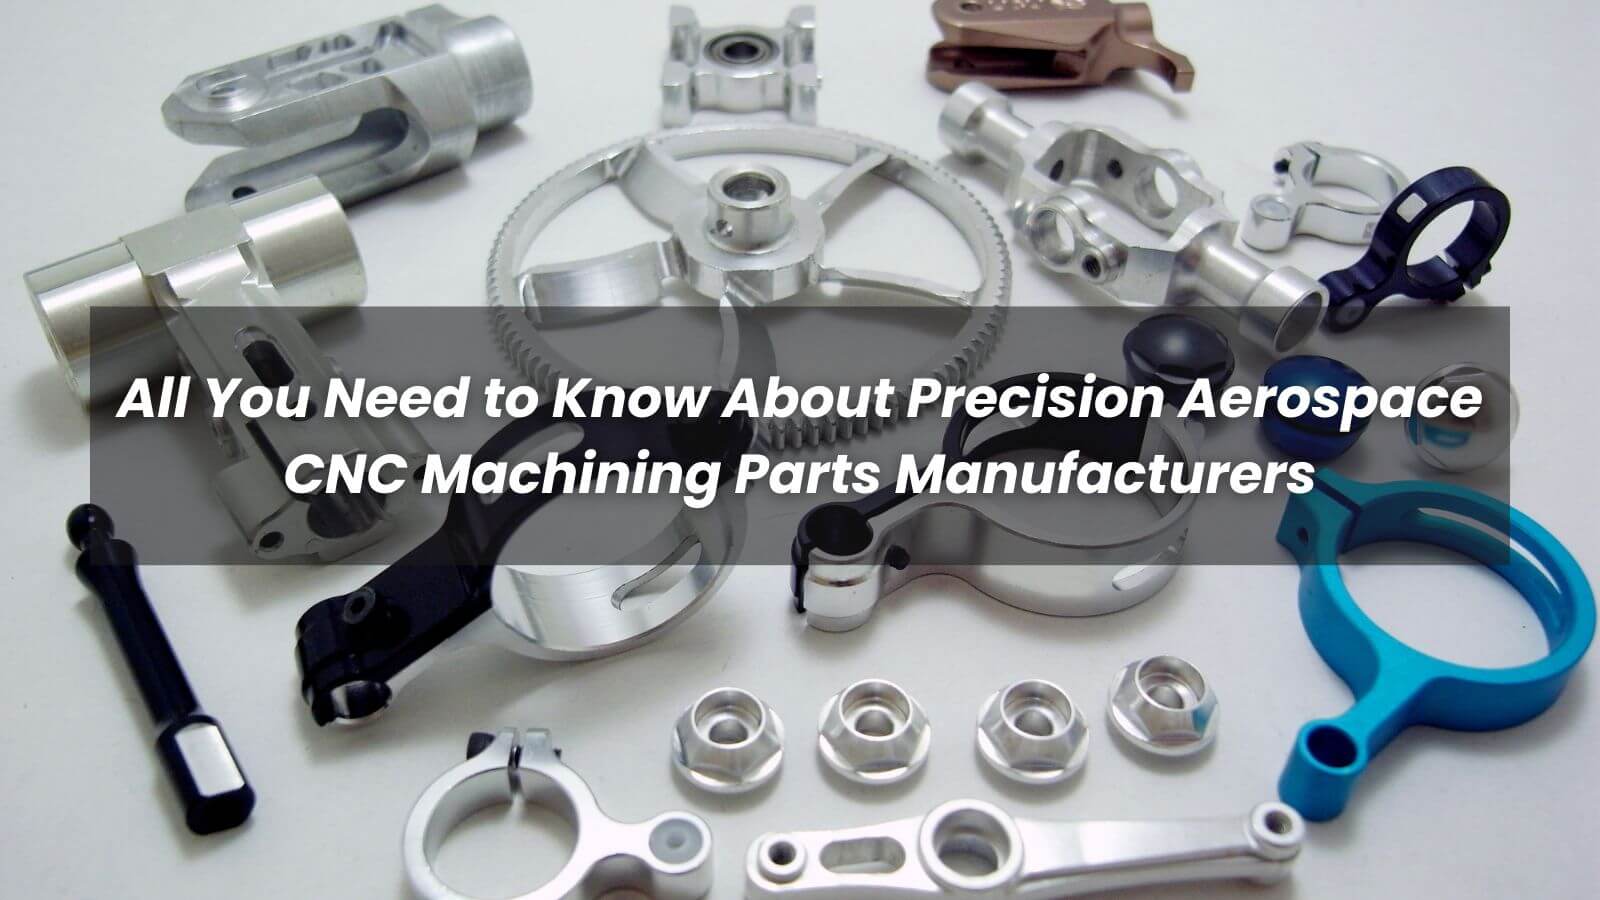 All You Need to Know About Precision Aerospace CNC Machining Parts Manufacturers